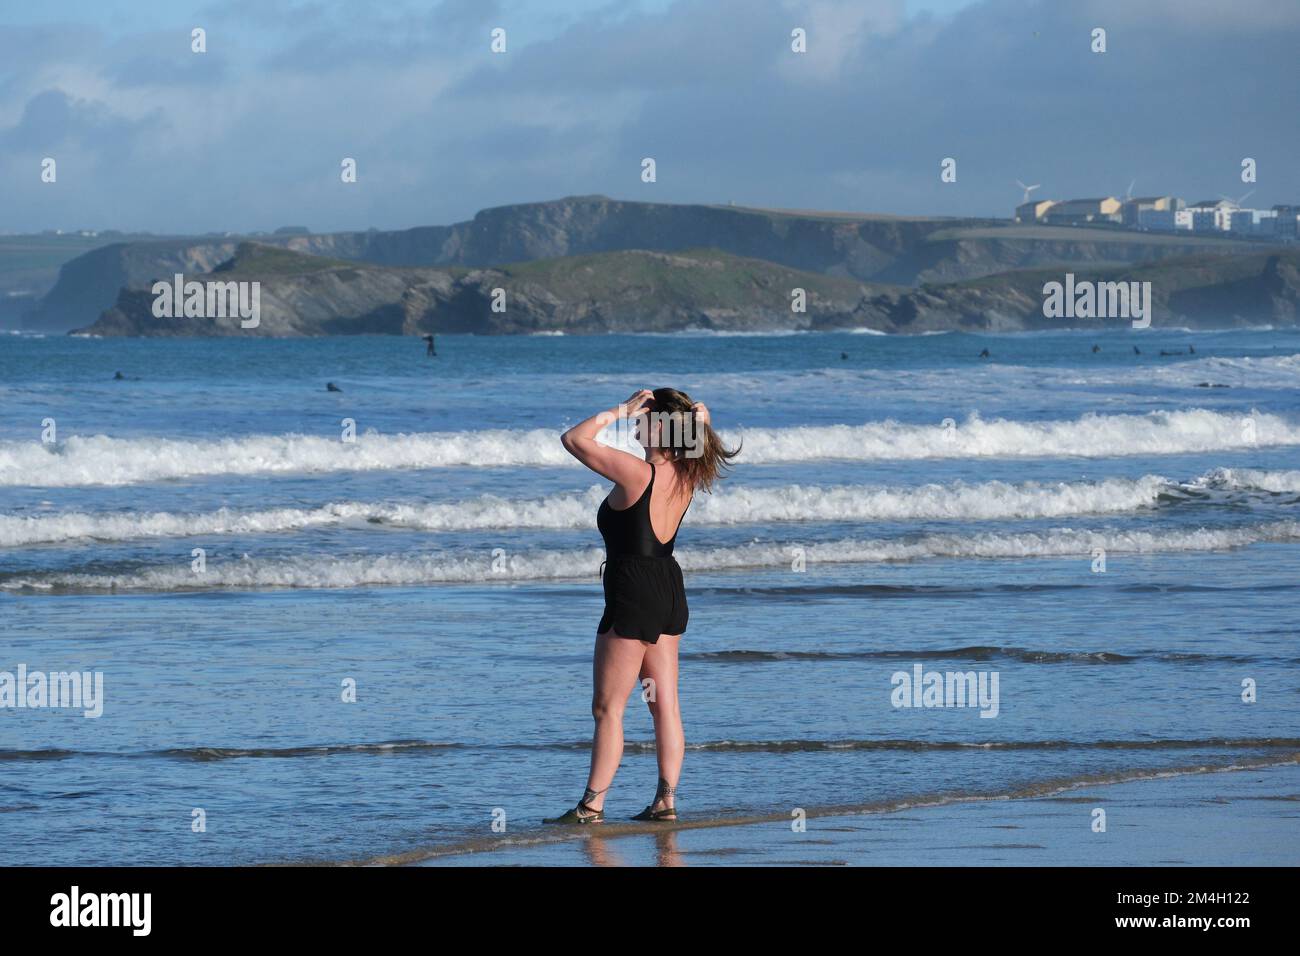 Newquay, Cornwall, UK. 21st December 2022. UK Weather. It was sunny and mild on the shortest day of the year at Newquay today, with surfers and swimmers making the most of the conditions. Credit Simon Maycock / Alamy Live News. Stock Photo